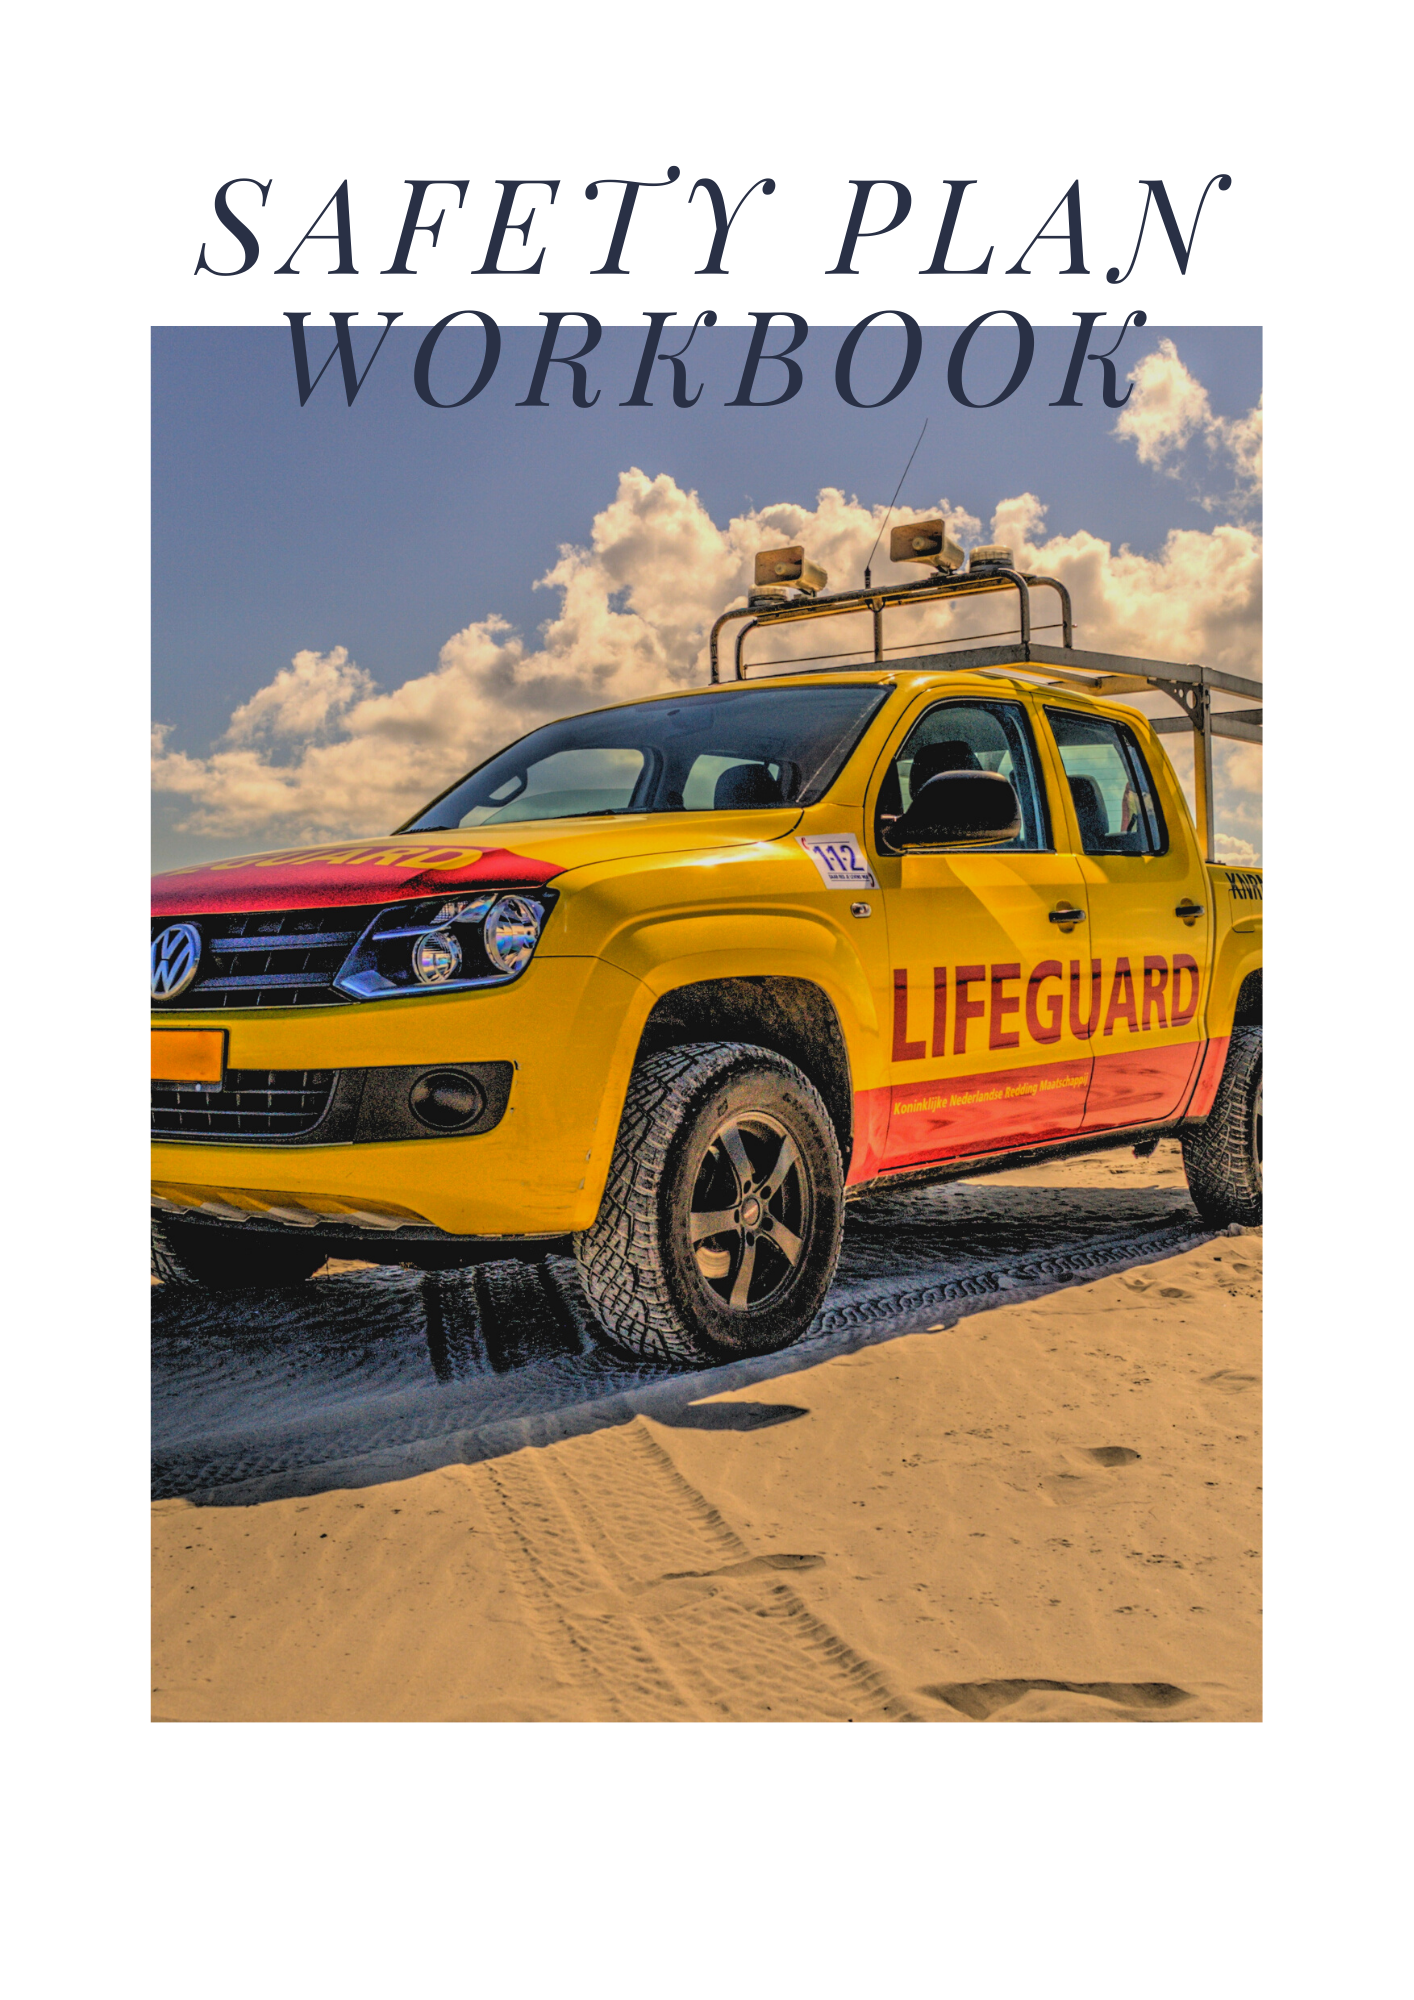 Cover for the Safety Plan Workbook that pictures a lifeguard off-road vehicle